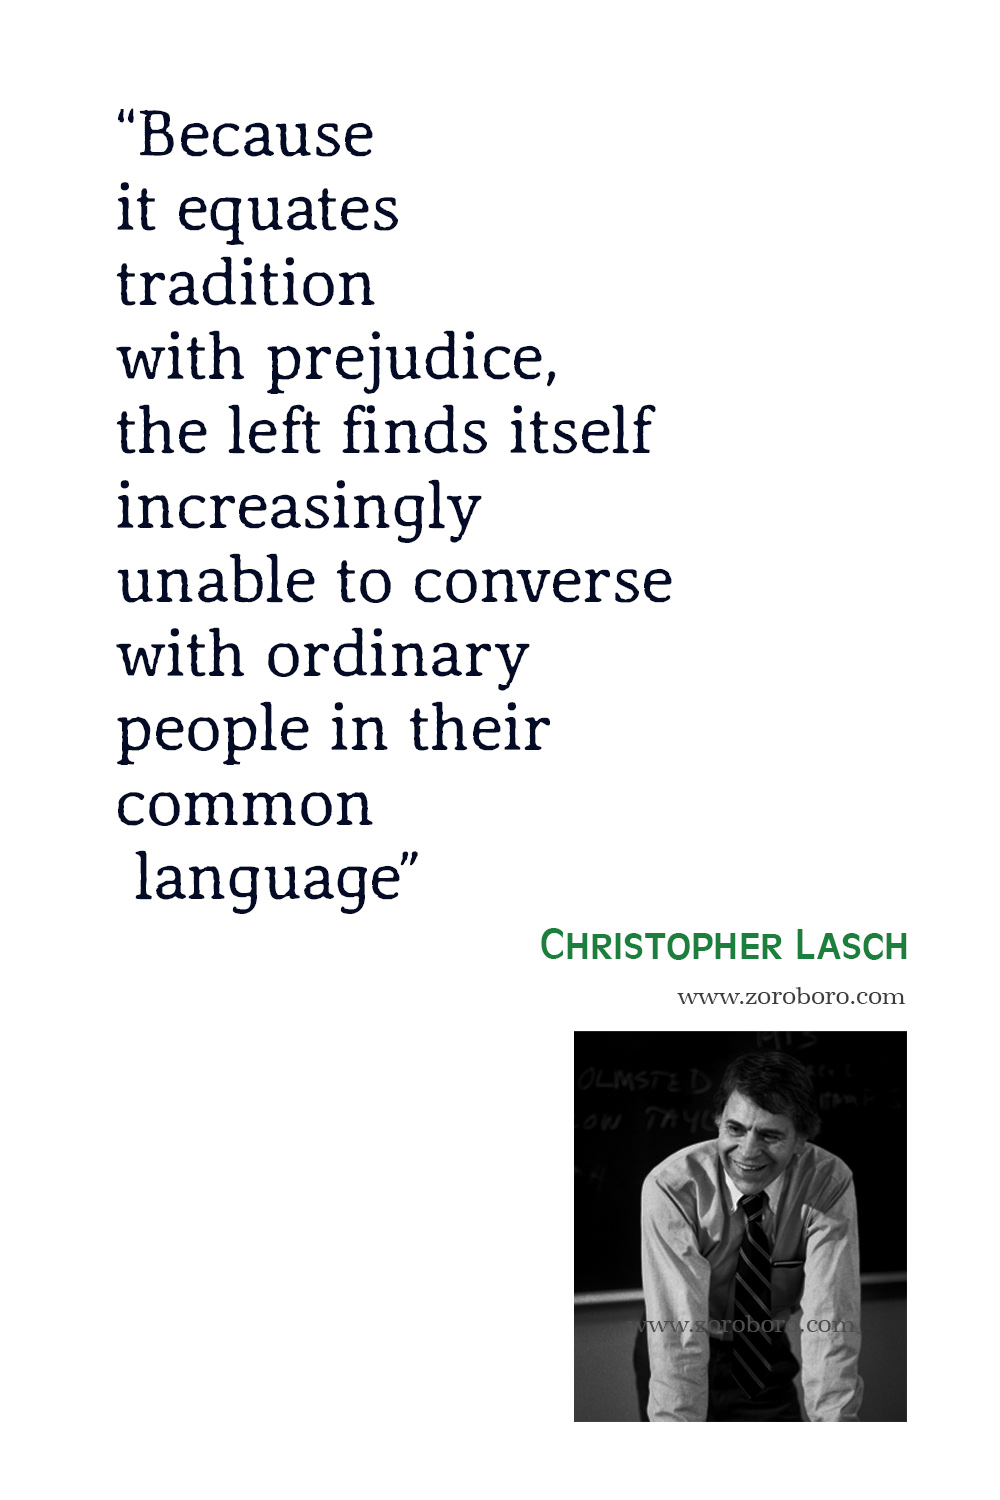 Christopher Lasch Quotes, Christopher Lasch The Culture of Narcissism Quotes, Christopher Lasch Books, Christopher Lasch.